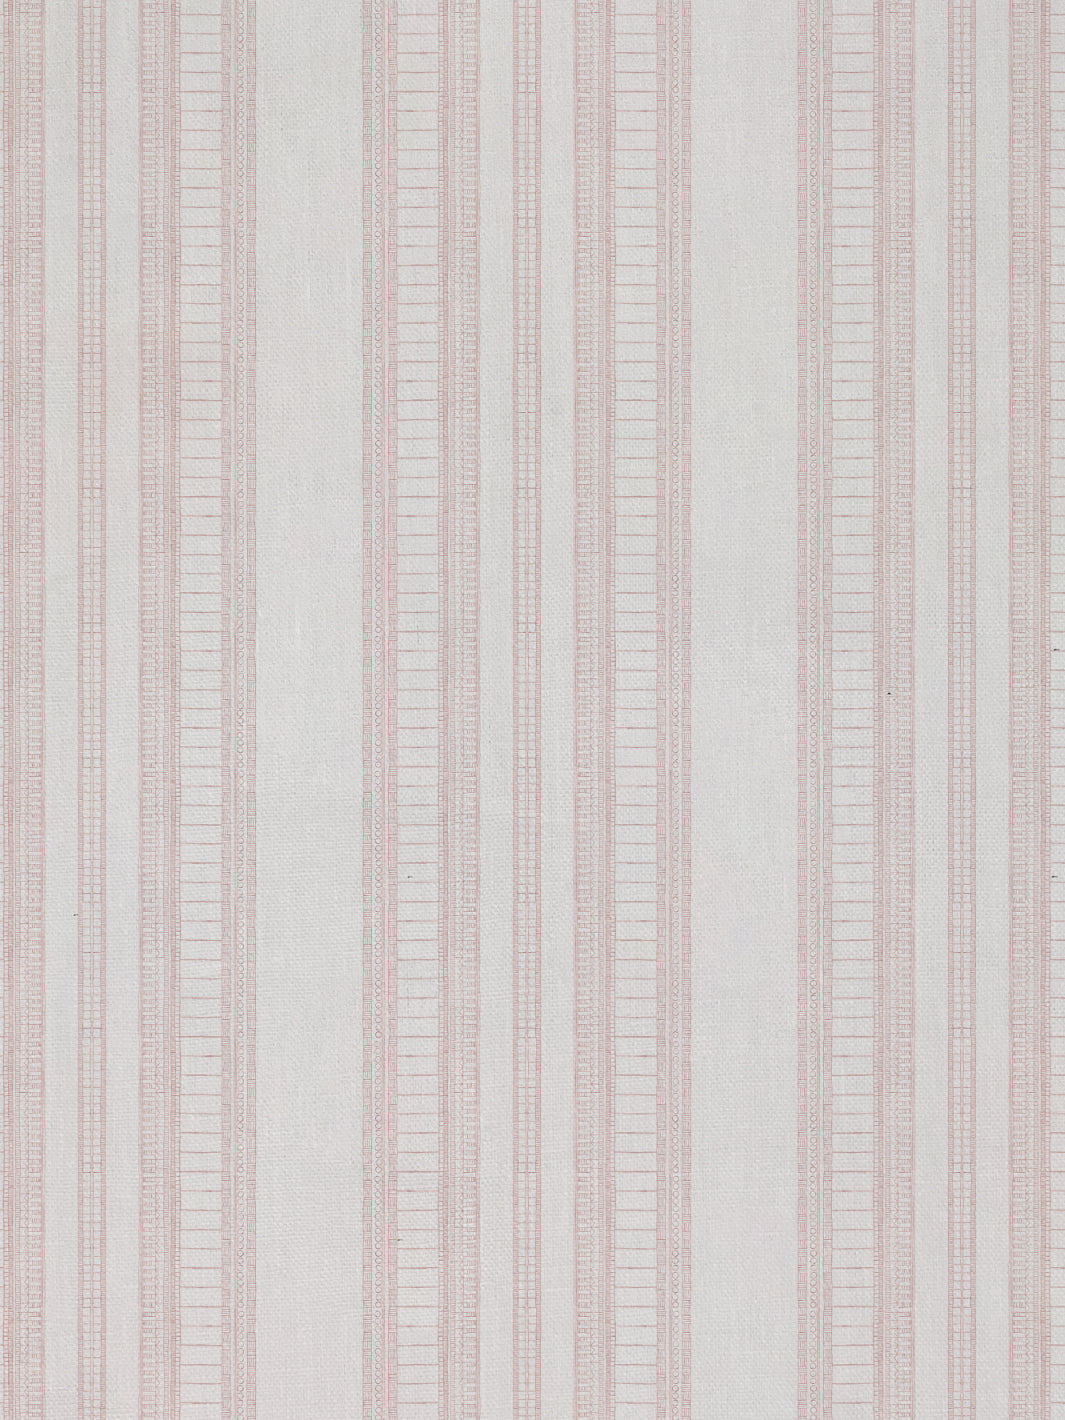 'Doodle Stripe' Linen Fabric by Nathan Turner - Pink